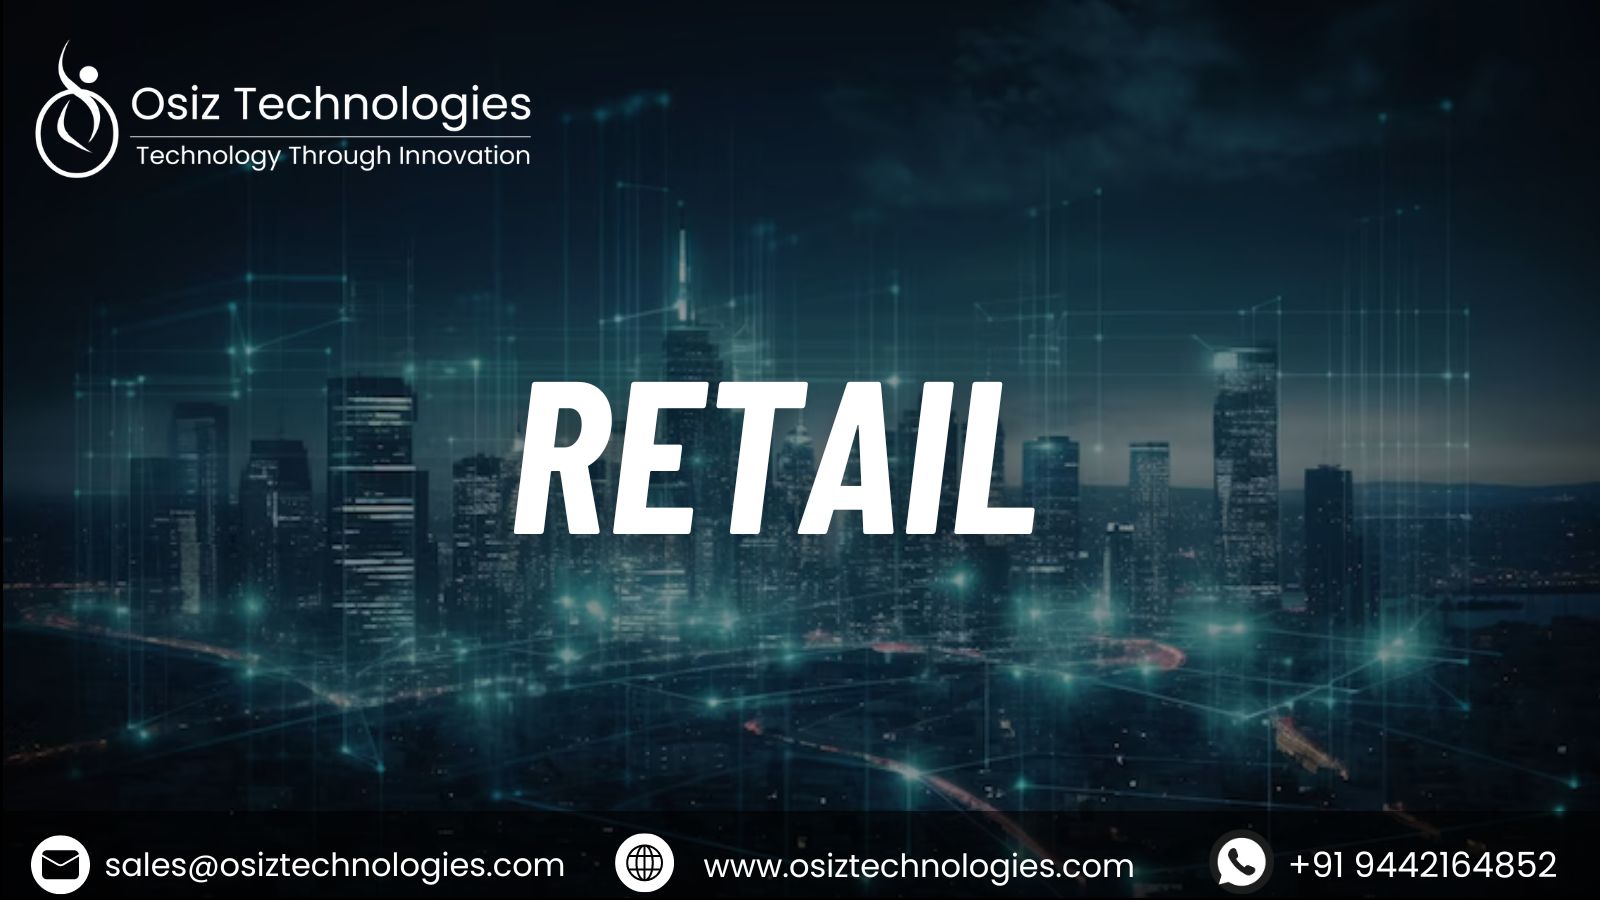 Experience the future of retail with AI